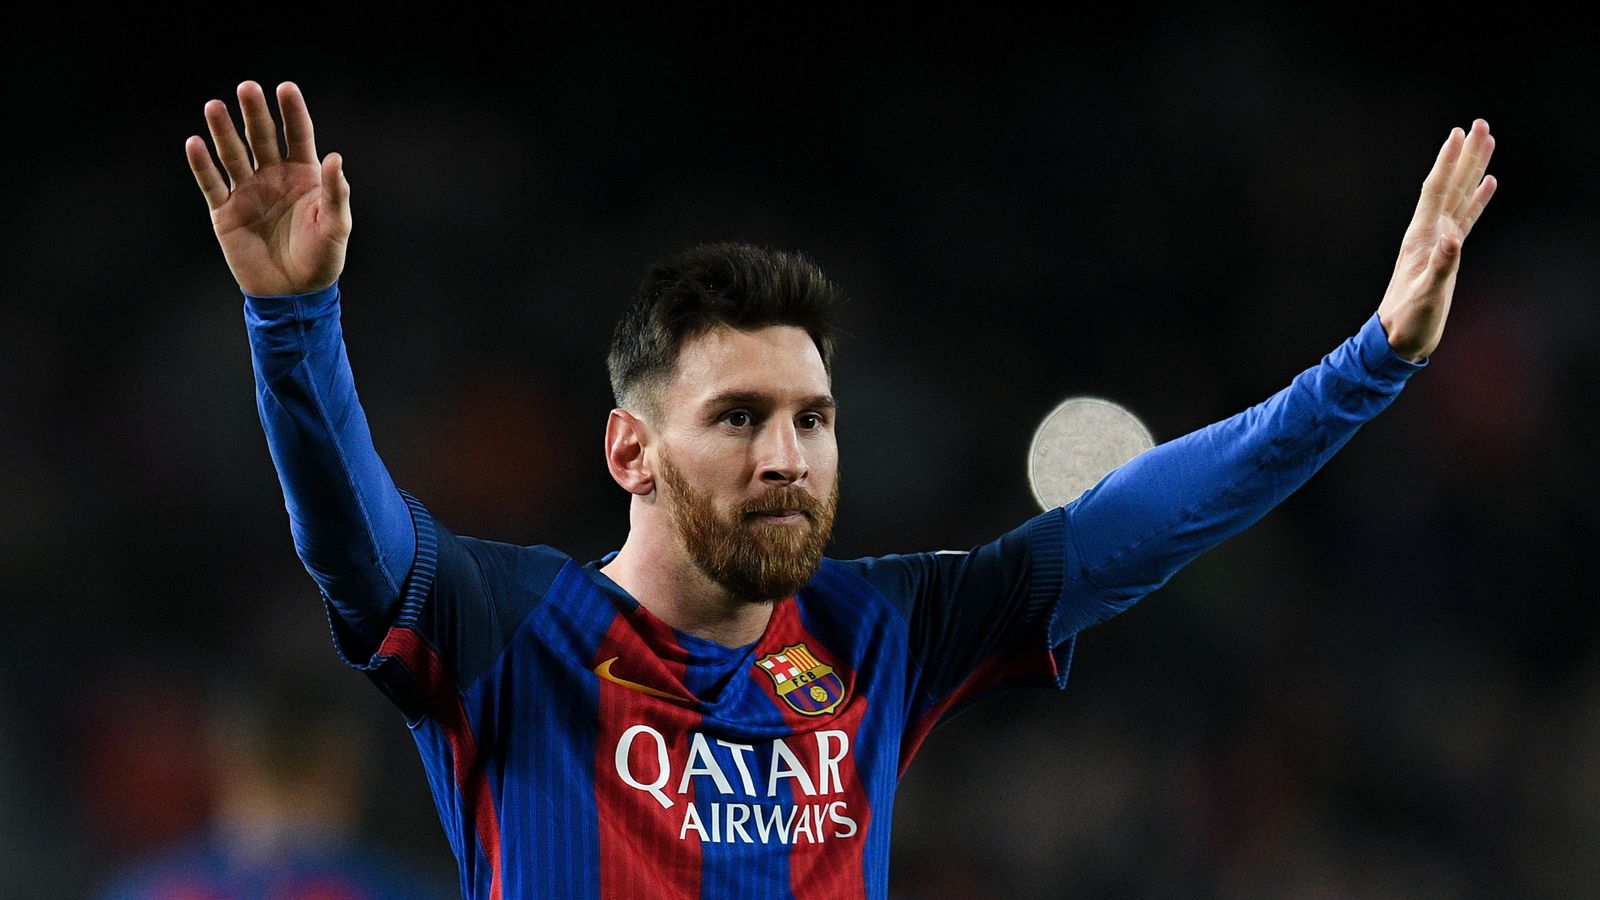 Lionel Messi: Footballer reluctantly stays at Barca but says club president 'did not keep his word' | World News | Sky News